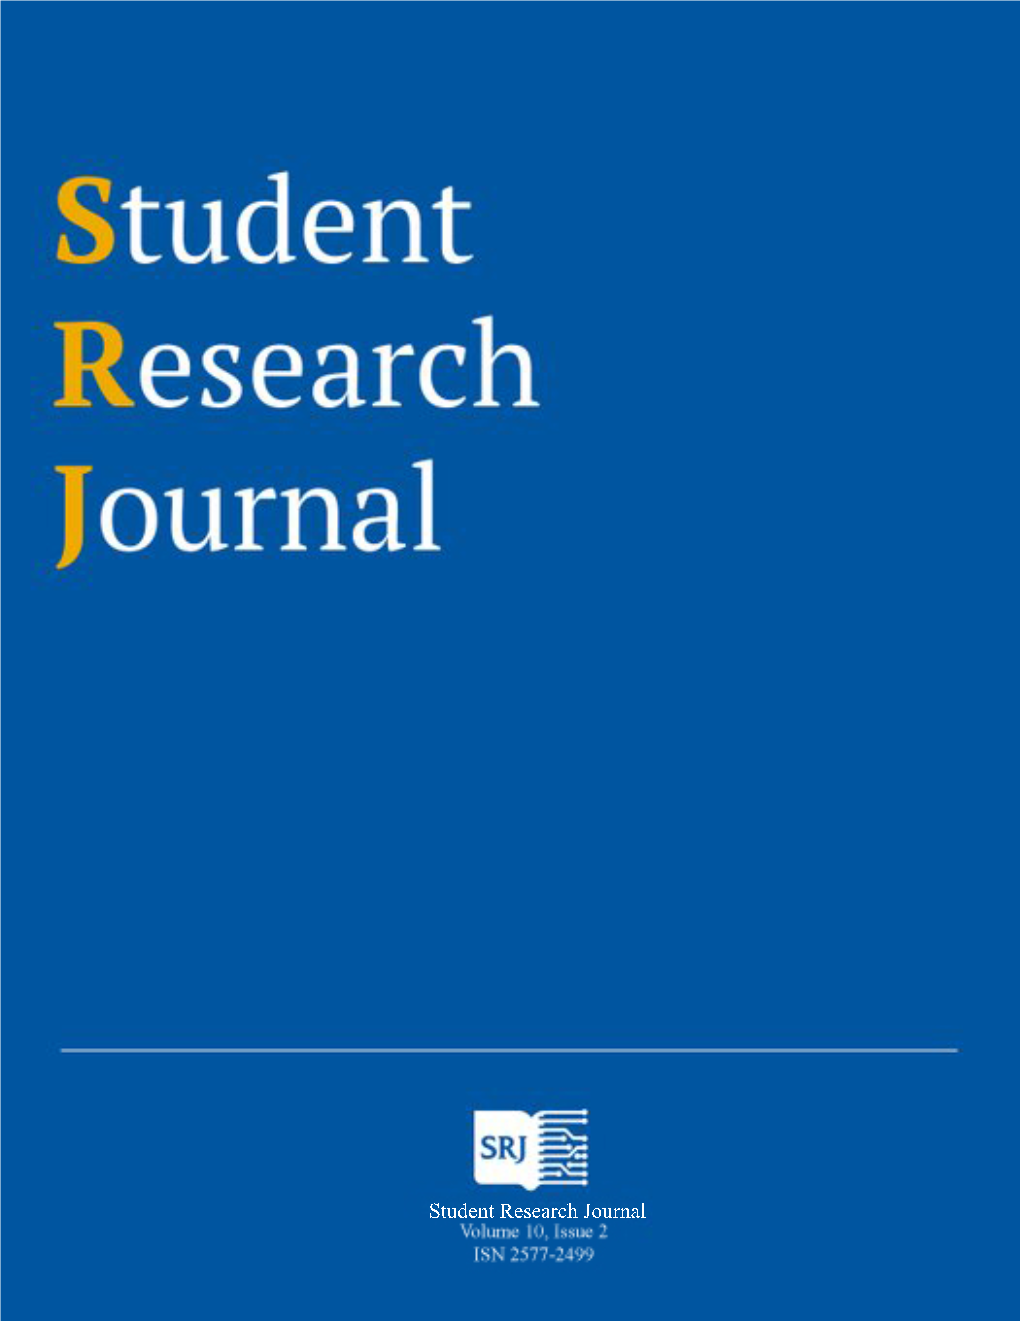 Ischool Student Research Journal, Vol.10, Iss.2